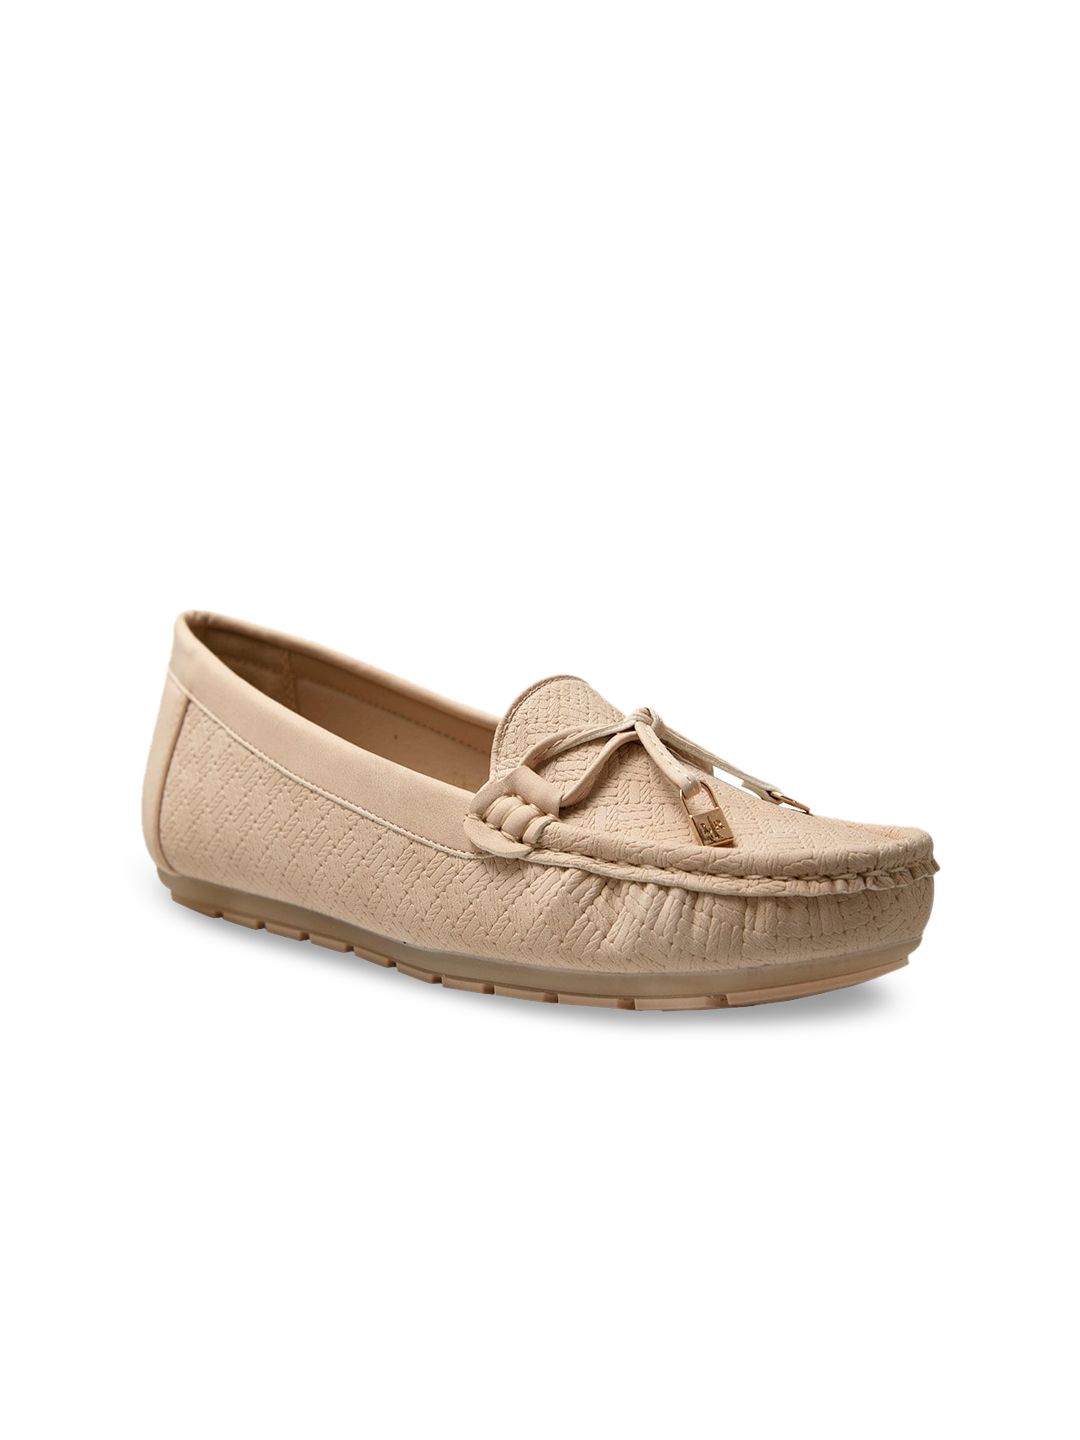 Addons Women Nude-Coloured Textured Lightweight PU Loafers Price in India